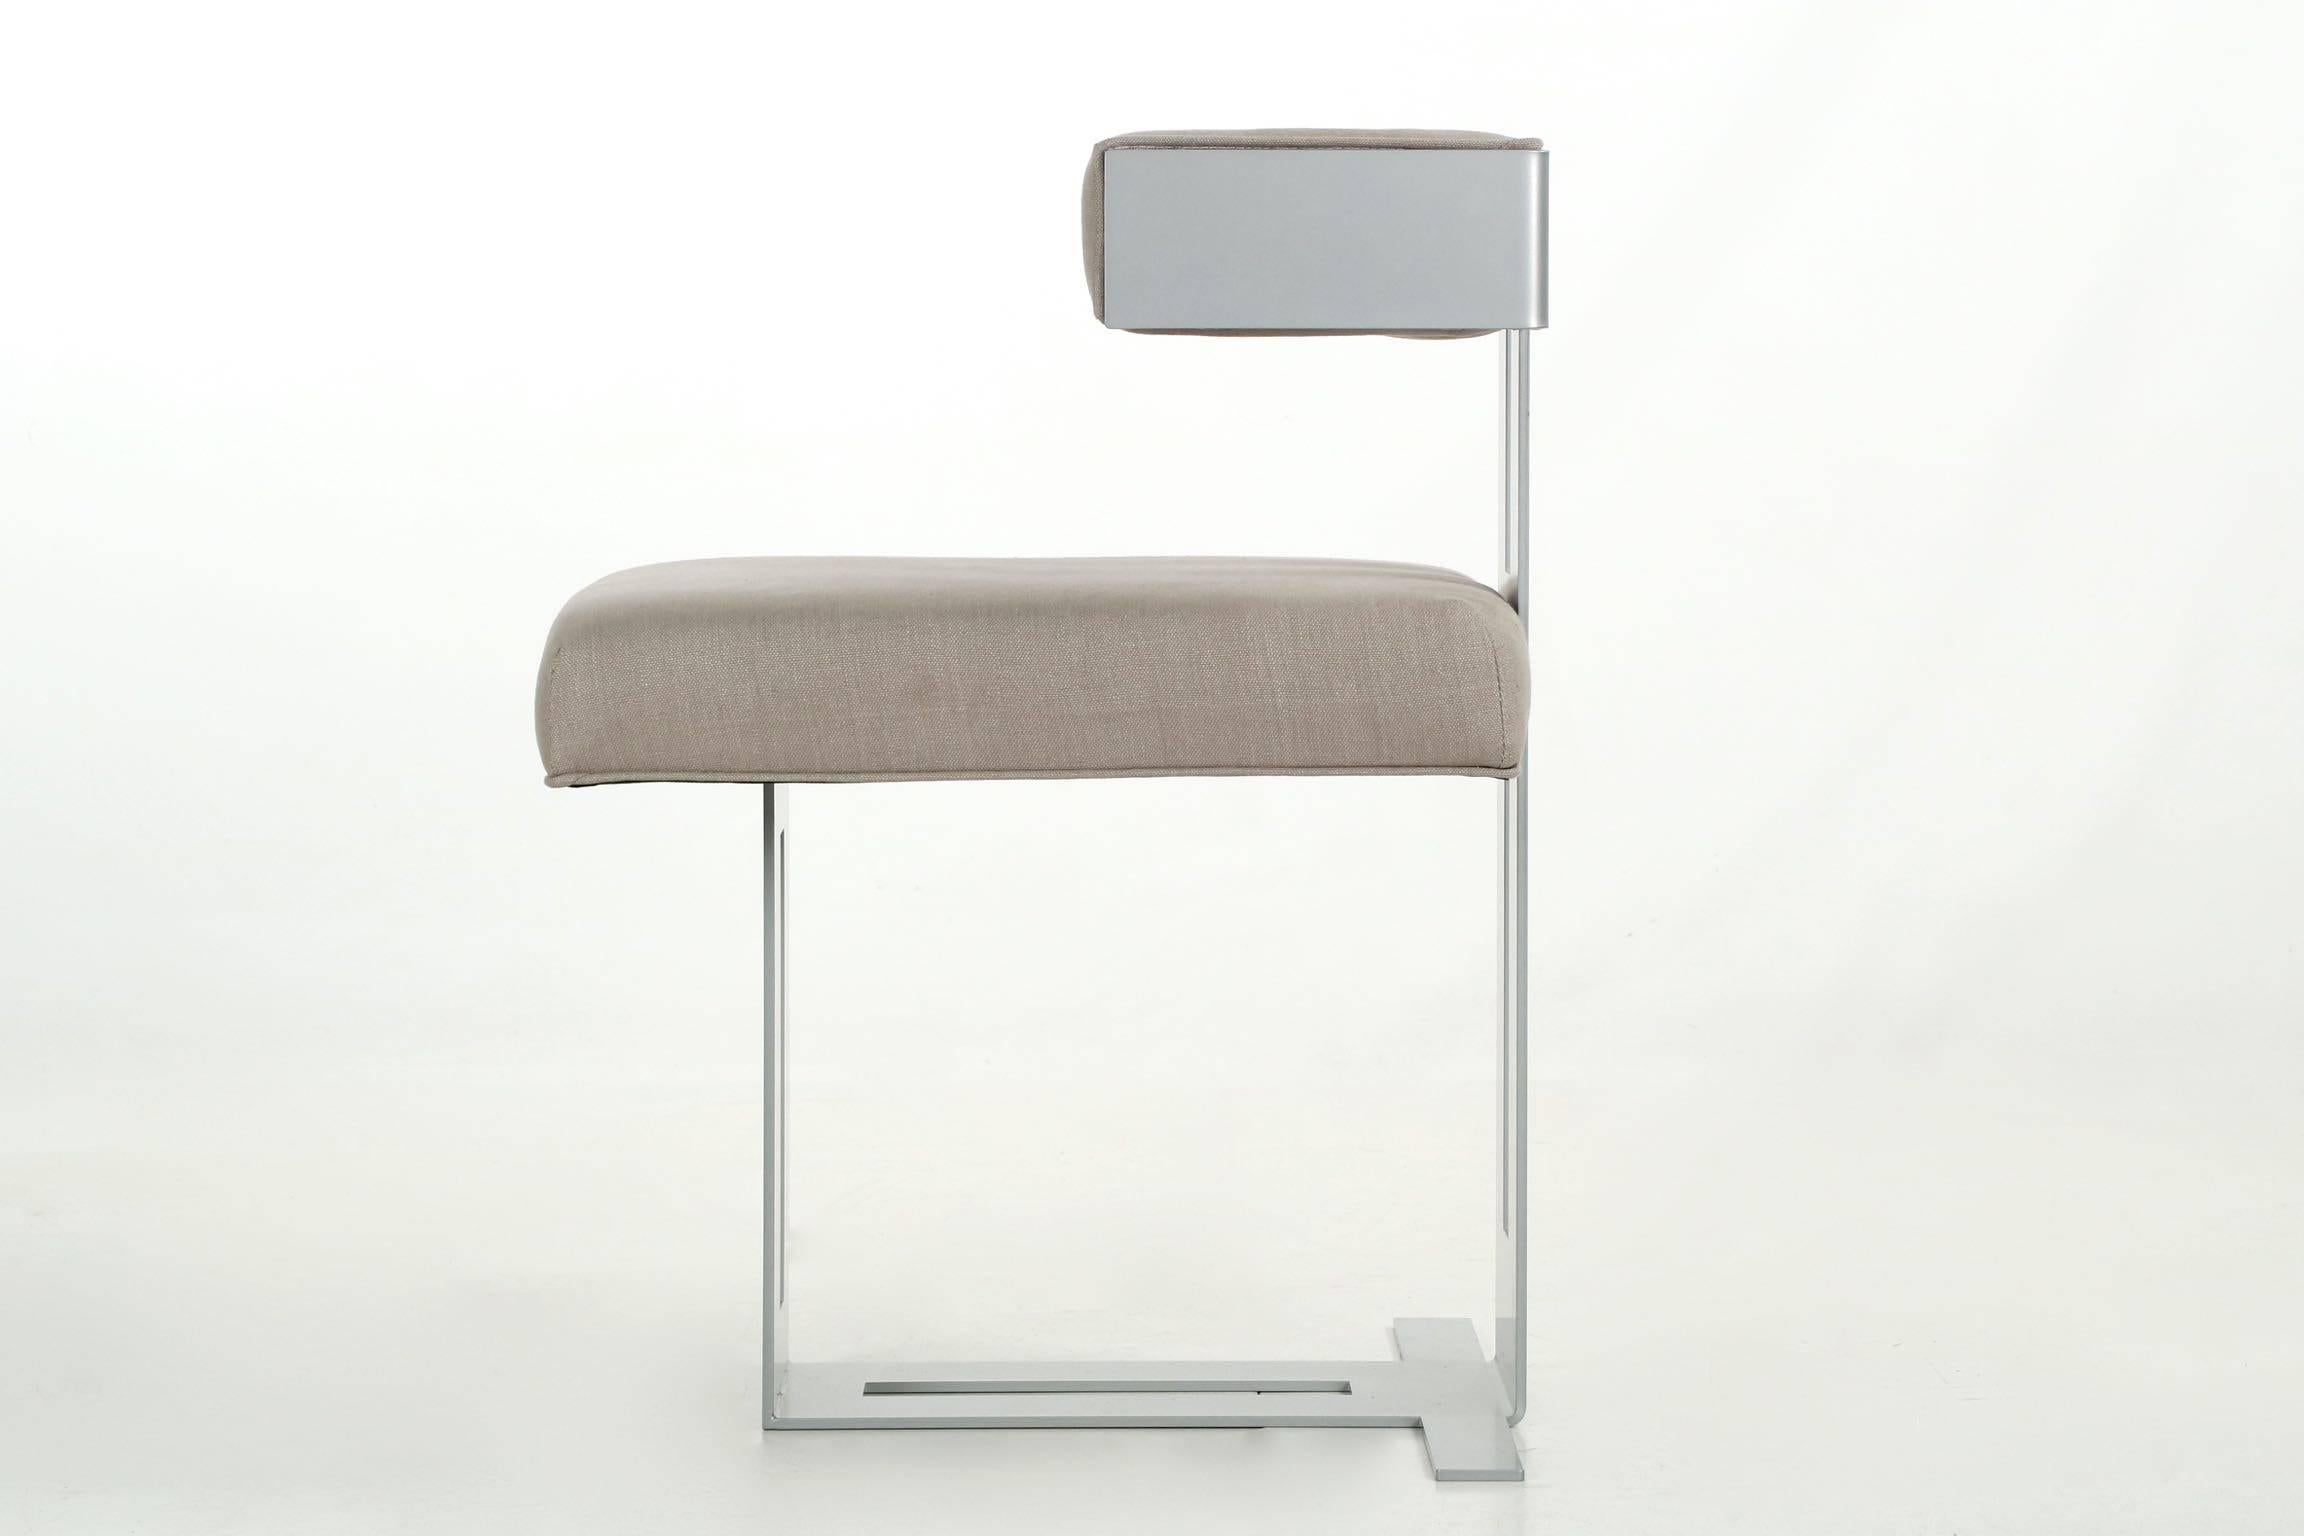 Modern Angular Gray Steel Lounge Armchair with Ottoman, 21st Century In Excellent Condition For Sale In Shippensburg, PA